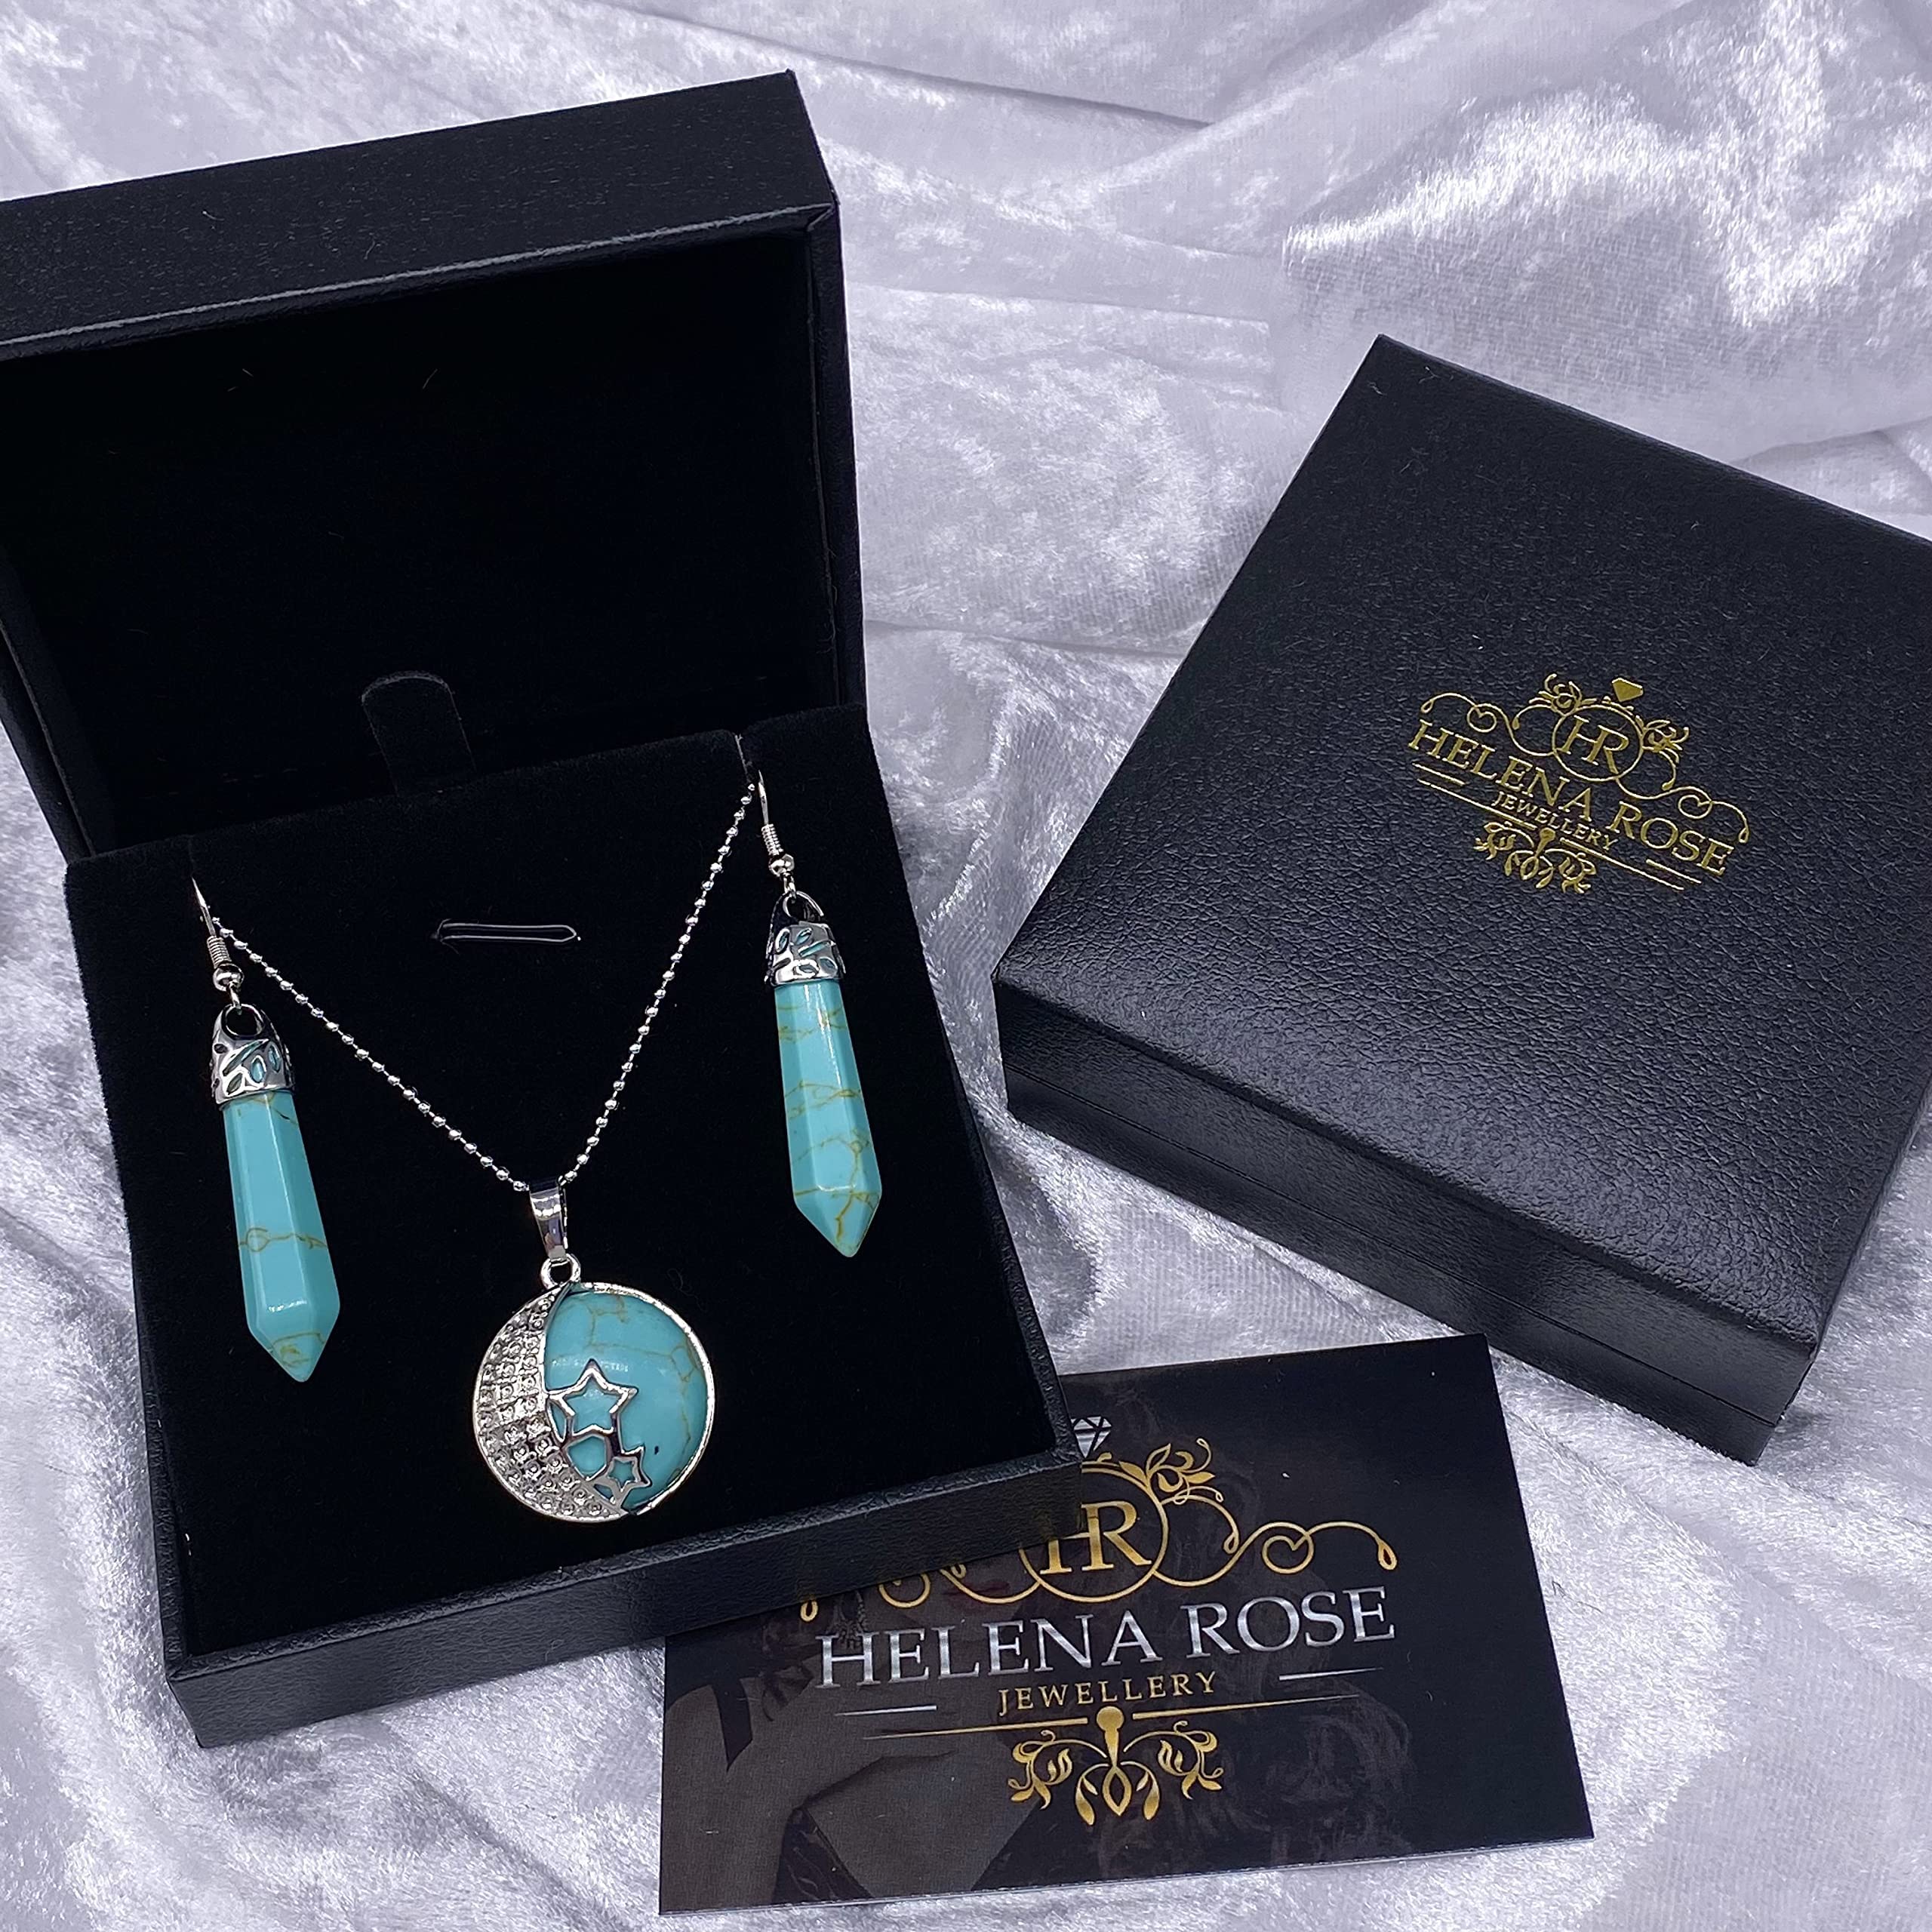 Jewellery Gift Set For Women - Silver Moon &amp; Stars Necklace &amp; Drop Earrings - Real Natural Crystal Quartz Gemstone Pendant For Ladies - With a Quality Gift Box